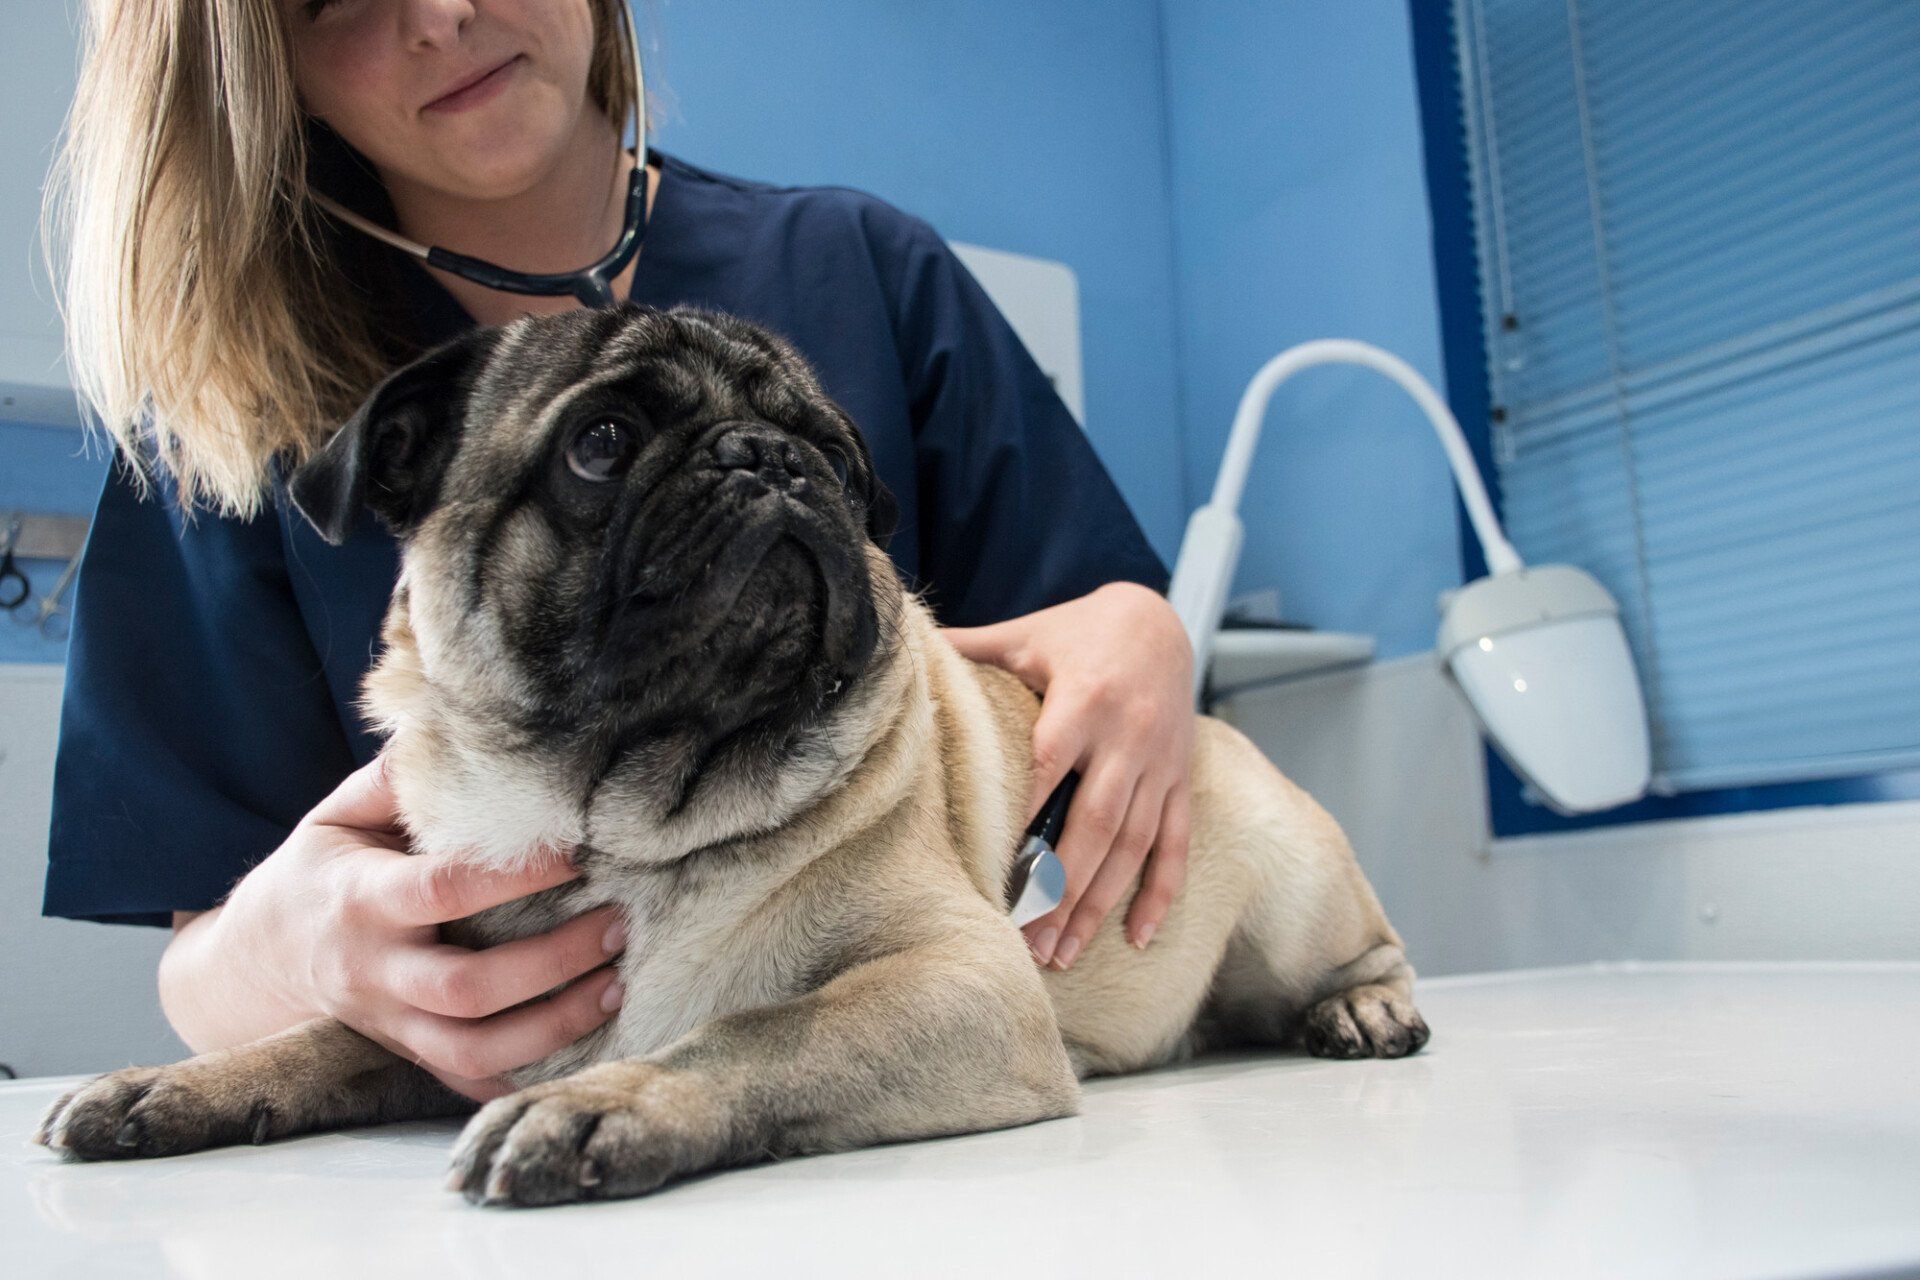 Veterinarian checking a dog with stethoscope in a veterinary clinic